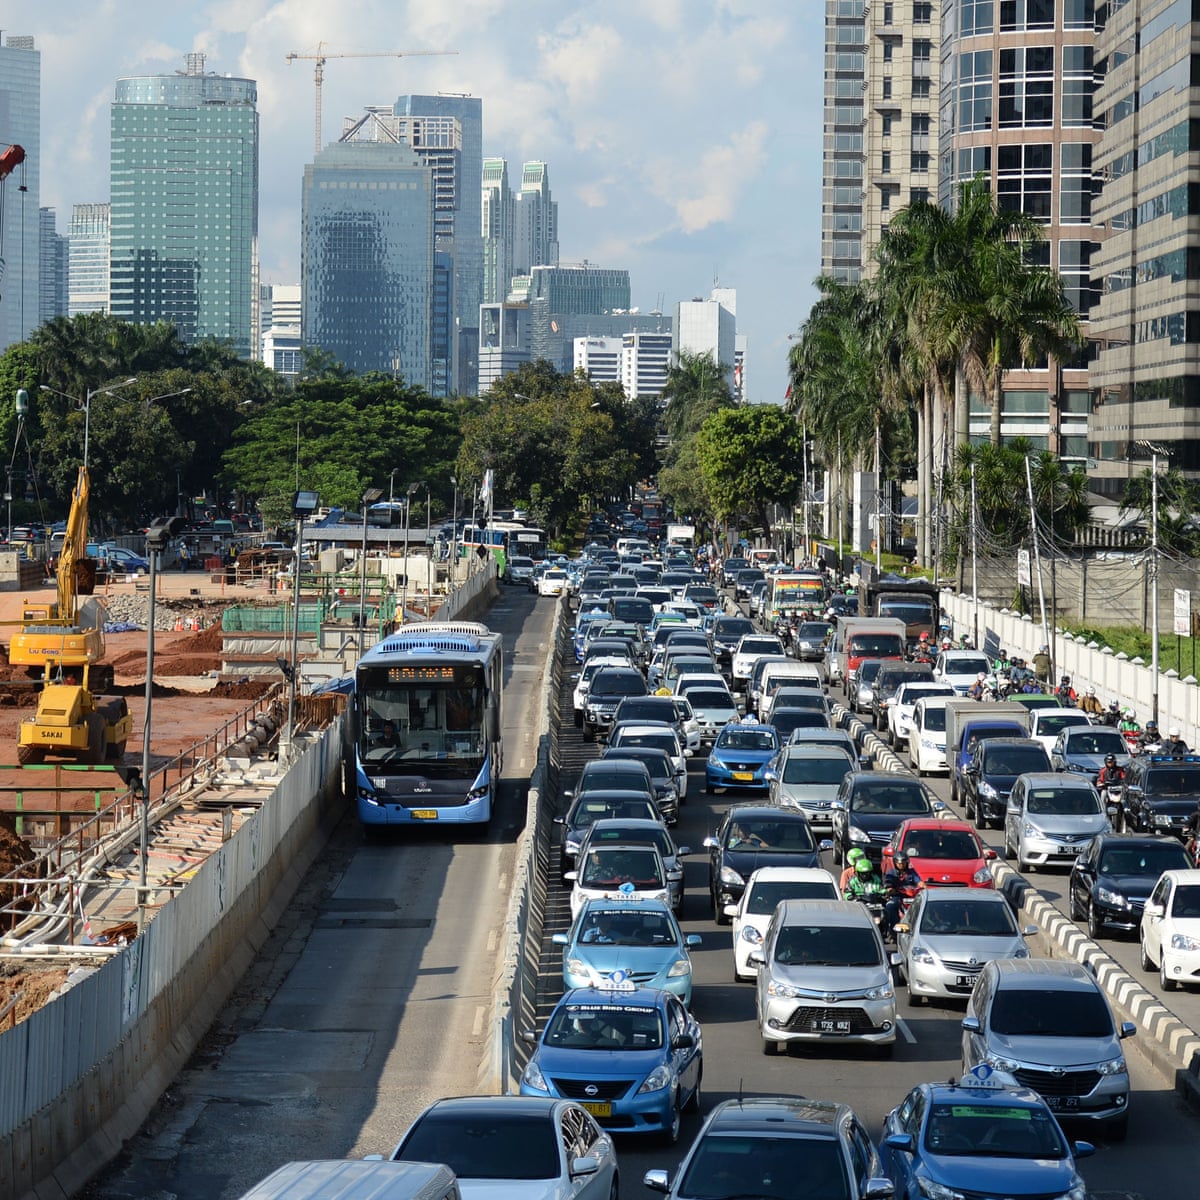 The Worlds Worst Traffic Can Jakarta Find An Alternative To The Car Cities The Guardian